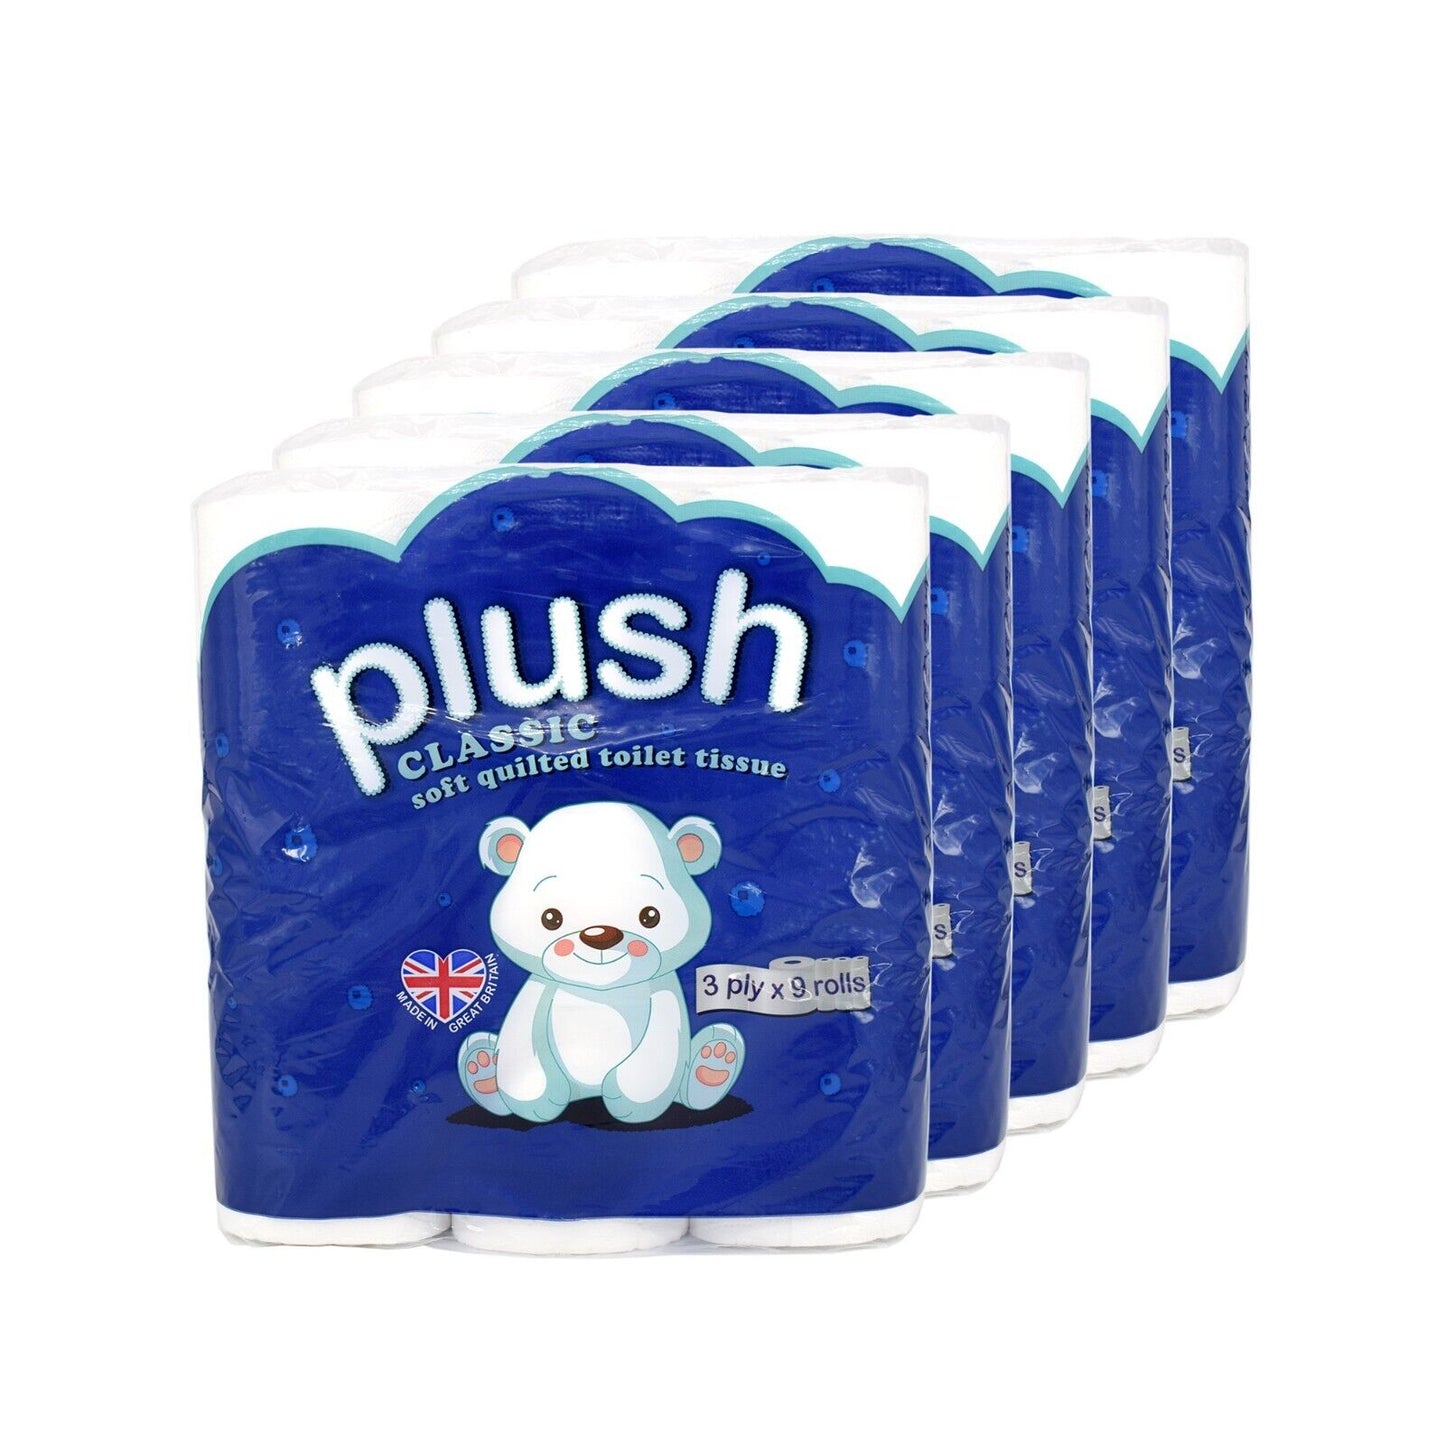 Plush Classic 3 Ply Soft Quilted Toilet Paper - 45 rolls